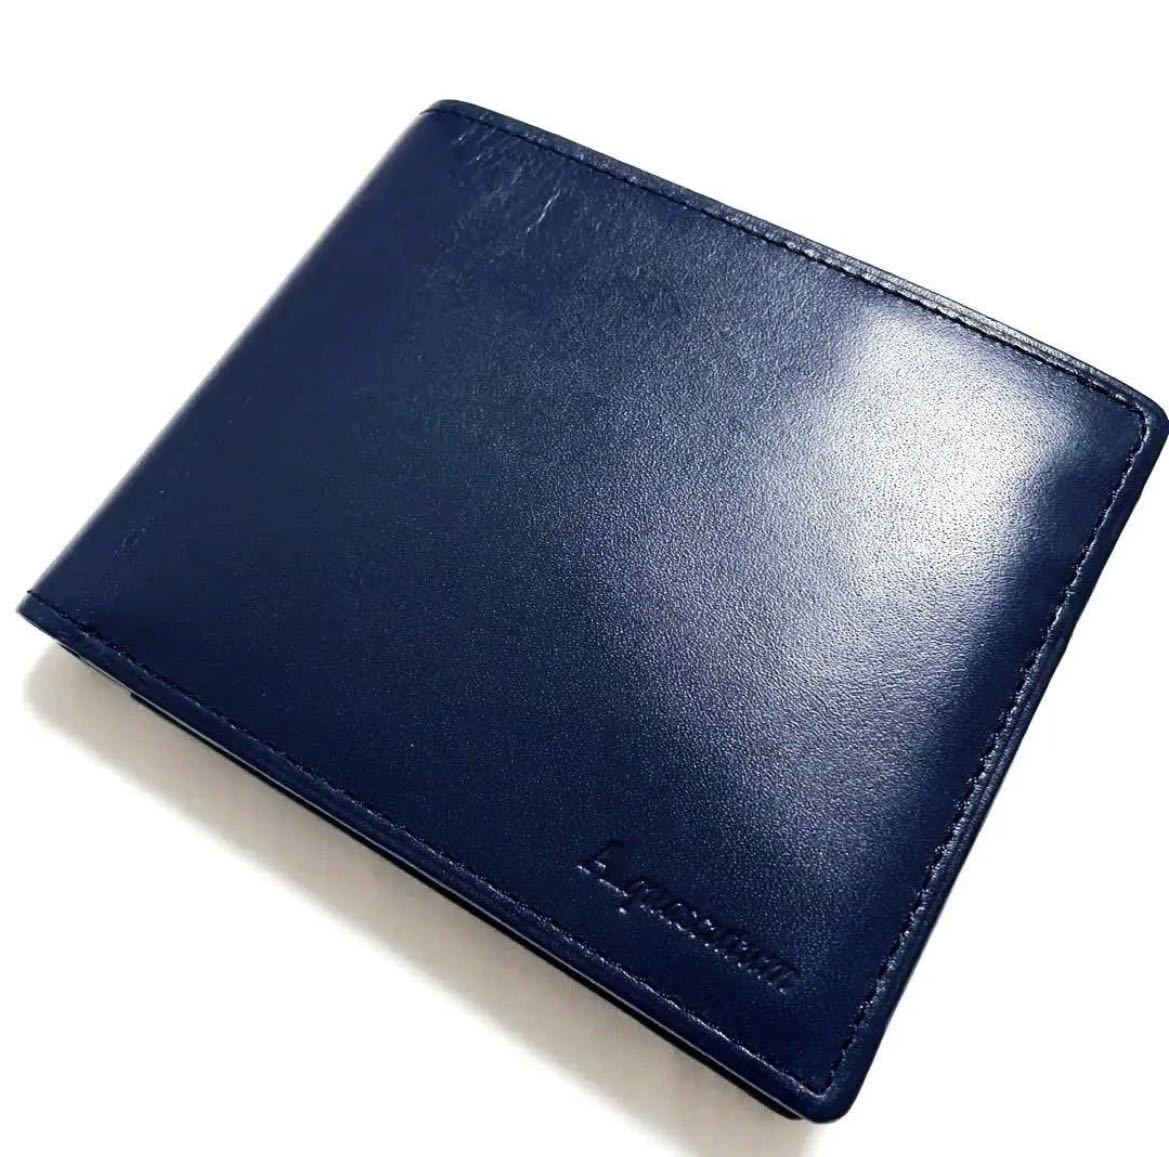  with translation new goods [ Aquascutum Aquascutum ] gentleman for made in Japan original leather purse leather wallet folding twice purse . inserting leather purse change purse . navy blue 